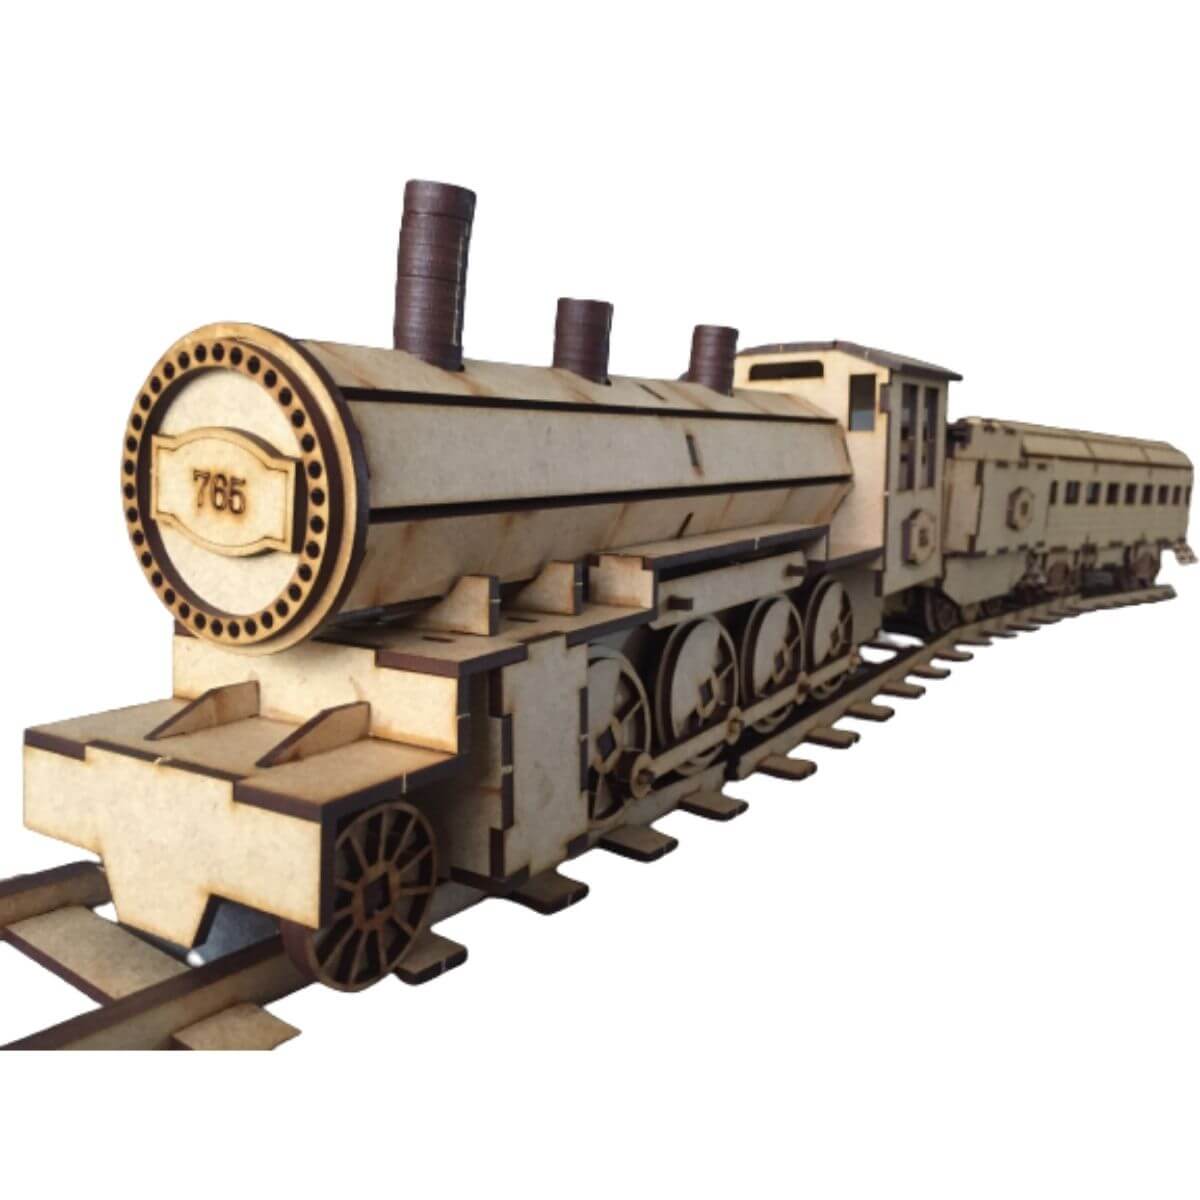 Locomotive Steam Train Complete with Engine, Tender, Coach and Tracks